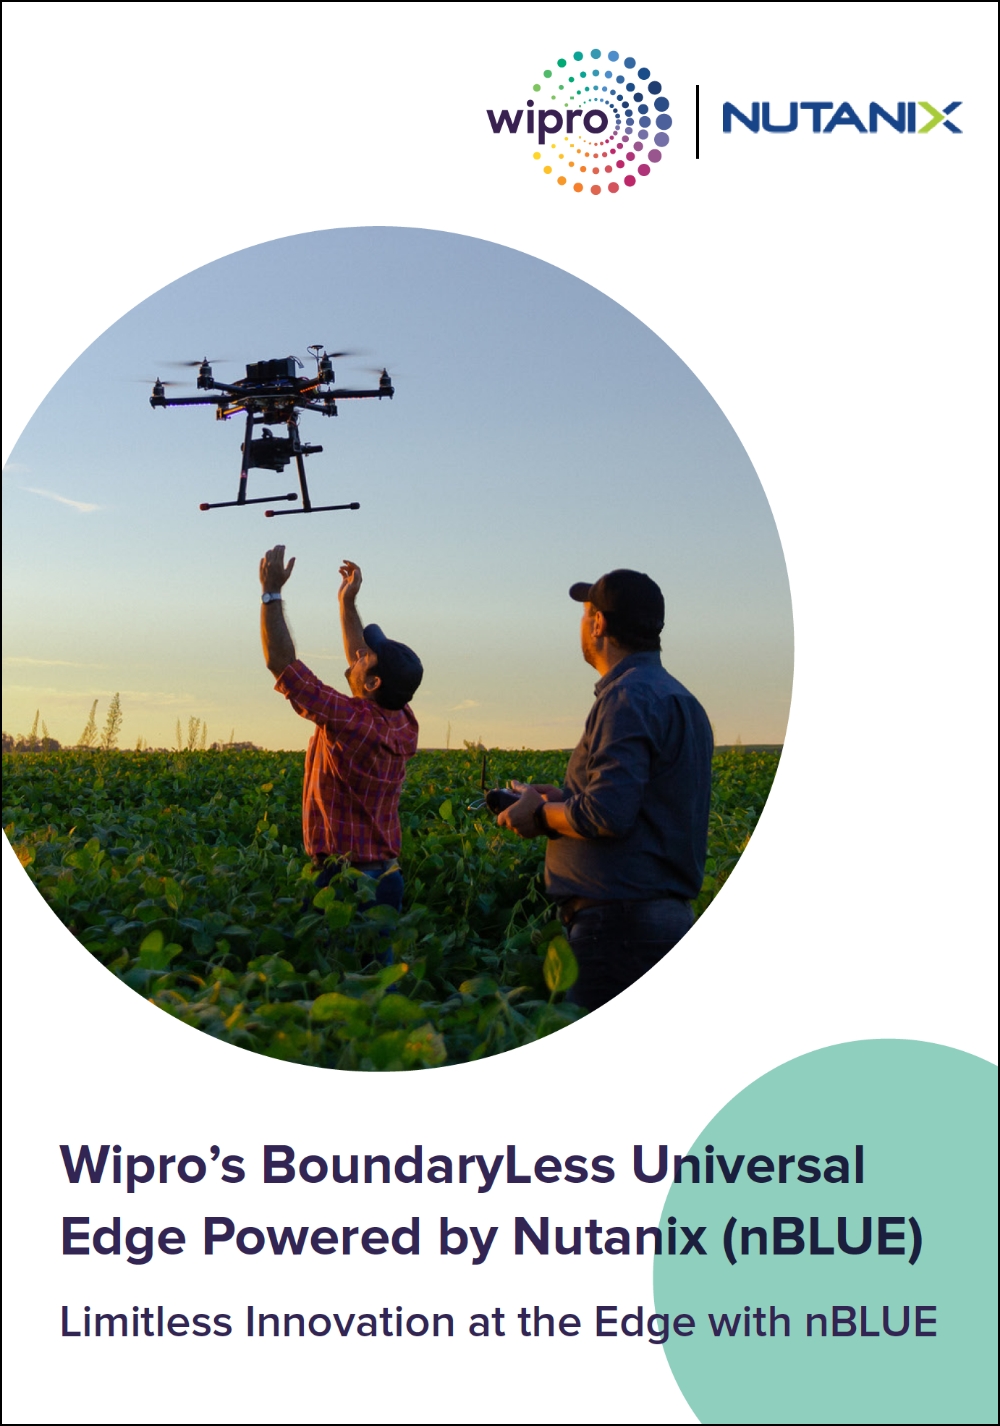 Unleash innovation at the Edge with Wipro’s BoundaryLess Universal Edge Powered by Nutanix (nBLUE)